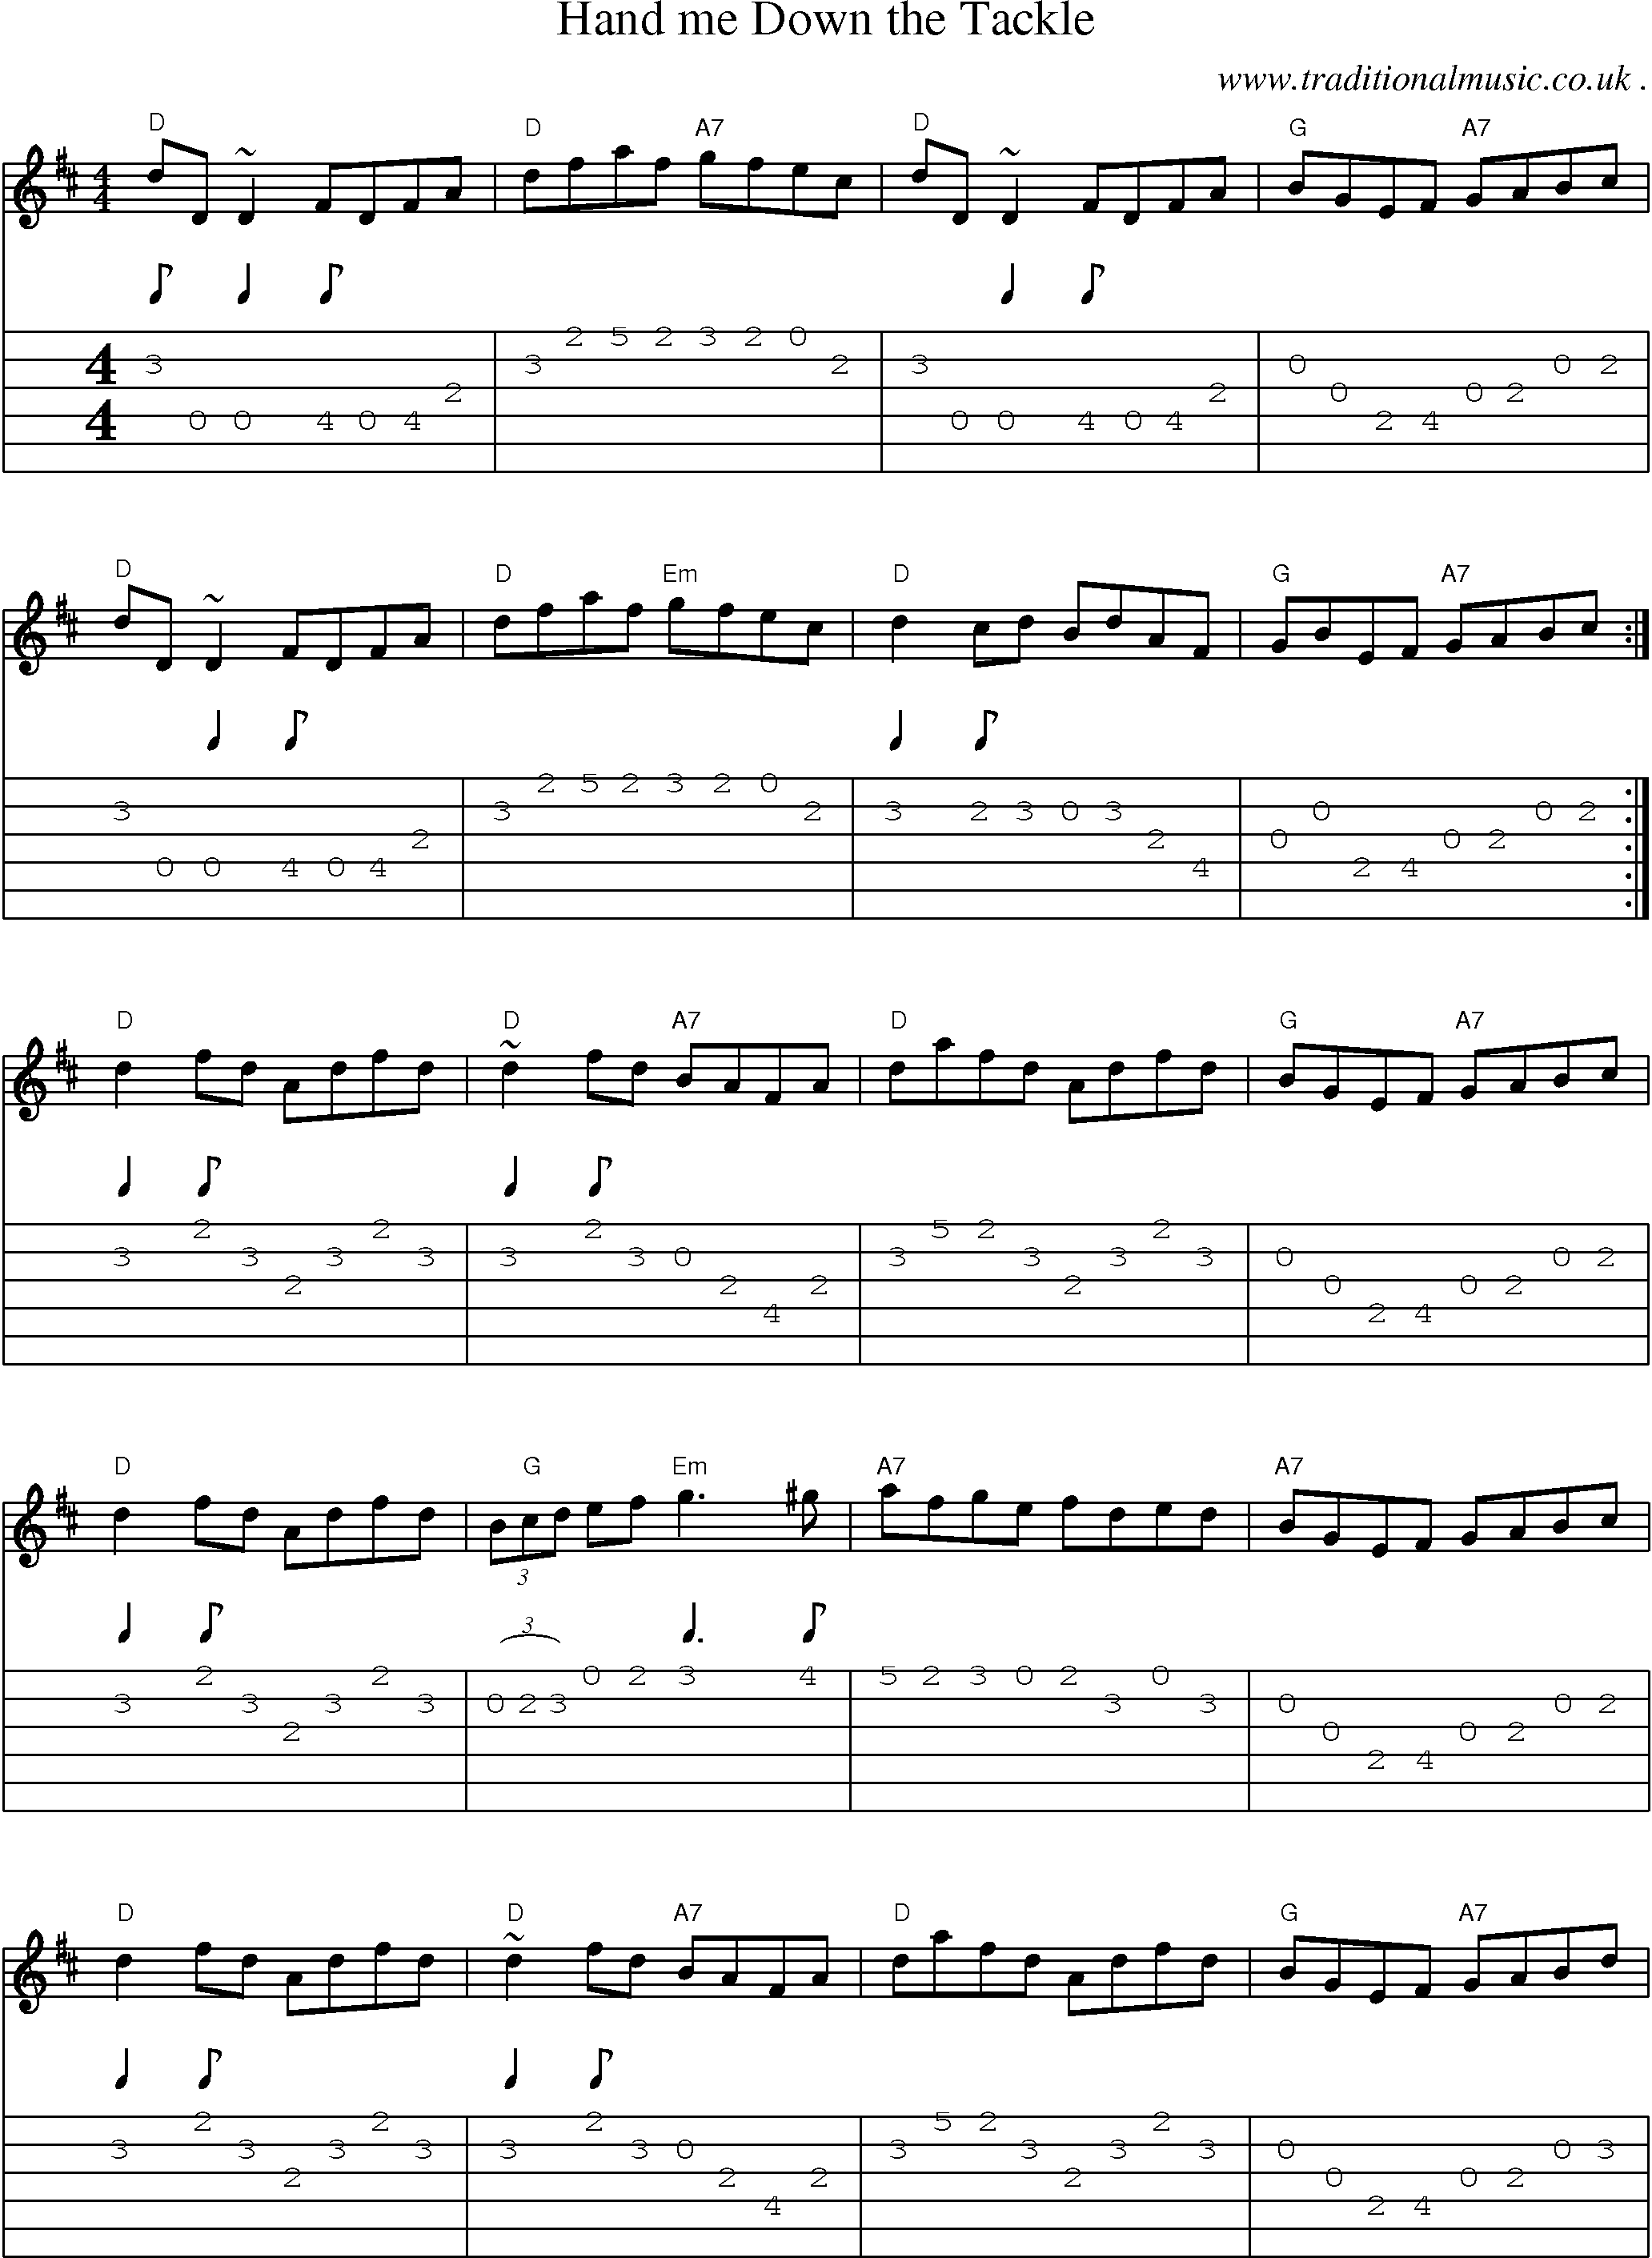 Sheet-music  score, Chords and Guitar Tabs for Hand Me Down The Tackle